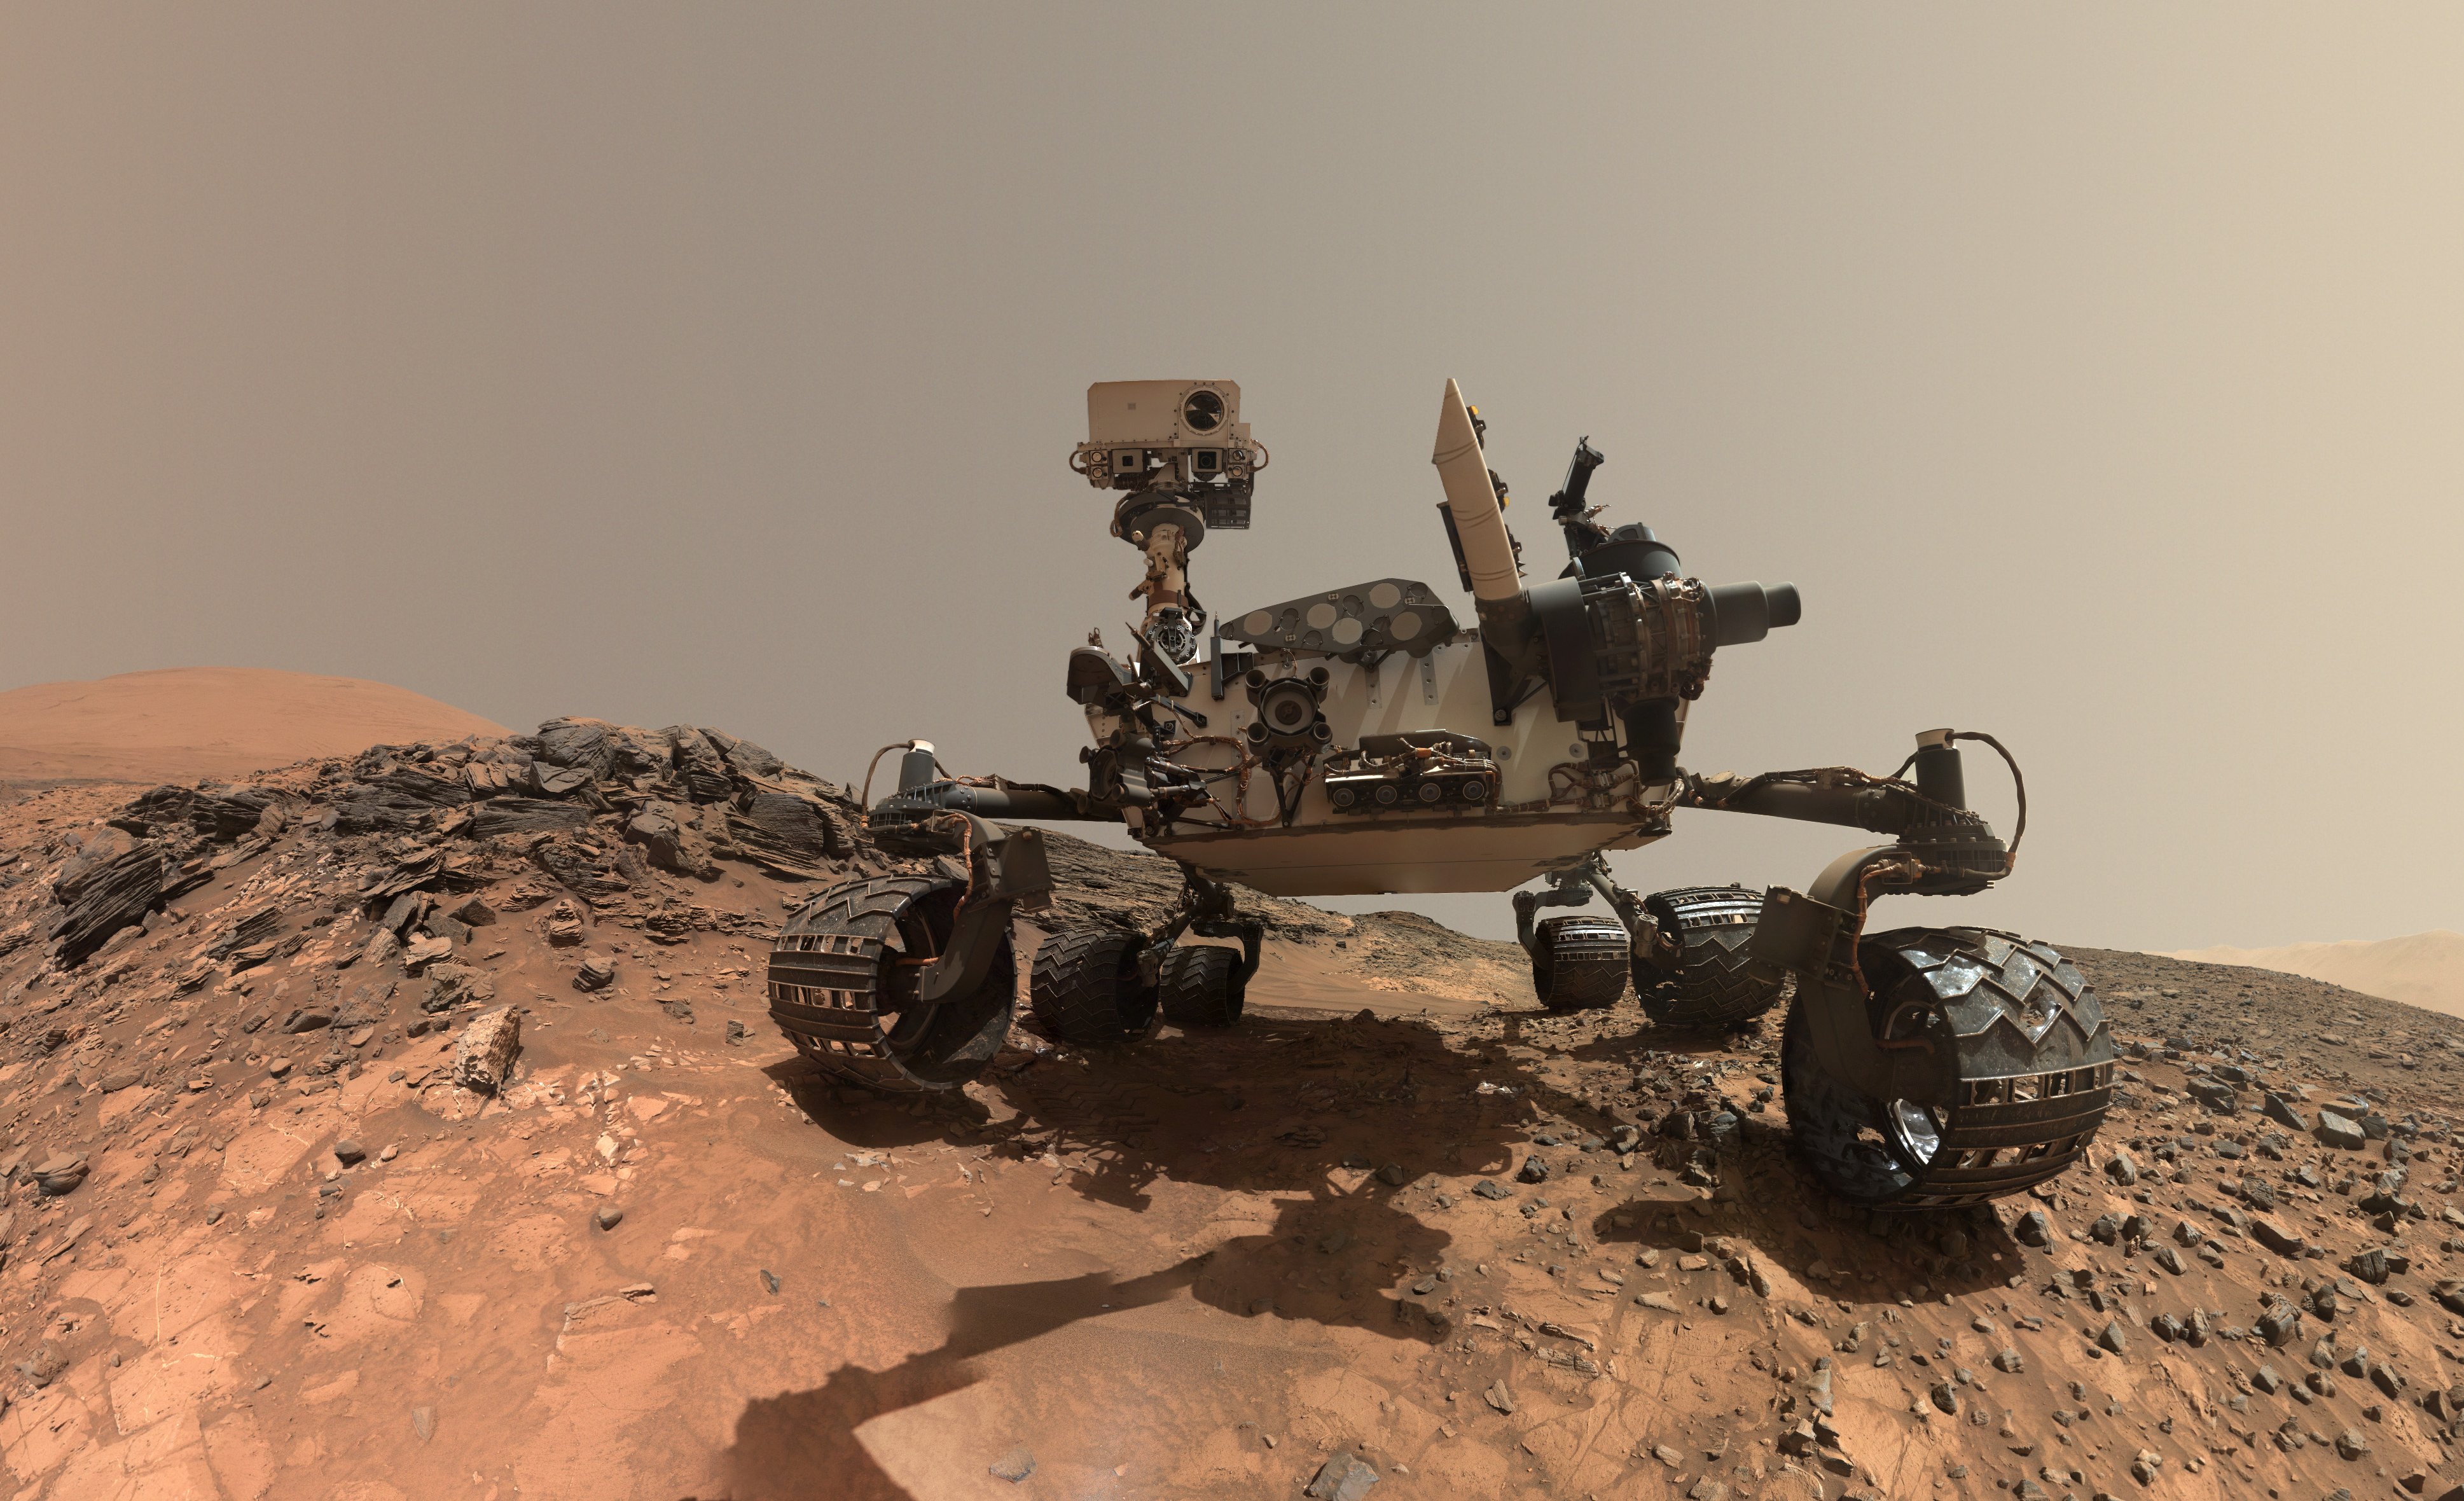 Low-angle self-portrait photo from NASA’s Mars Curiosity rover shows the vehicle on a patch of rocky ground on Mars. 